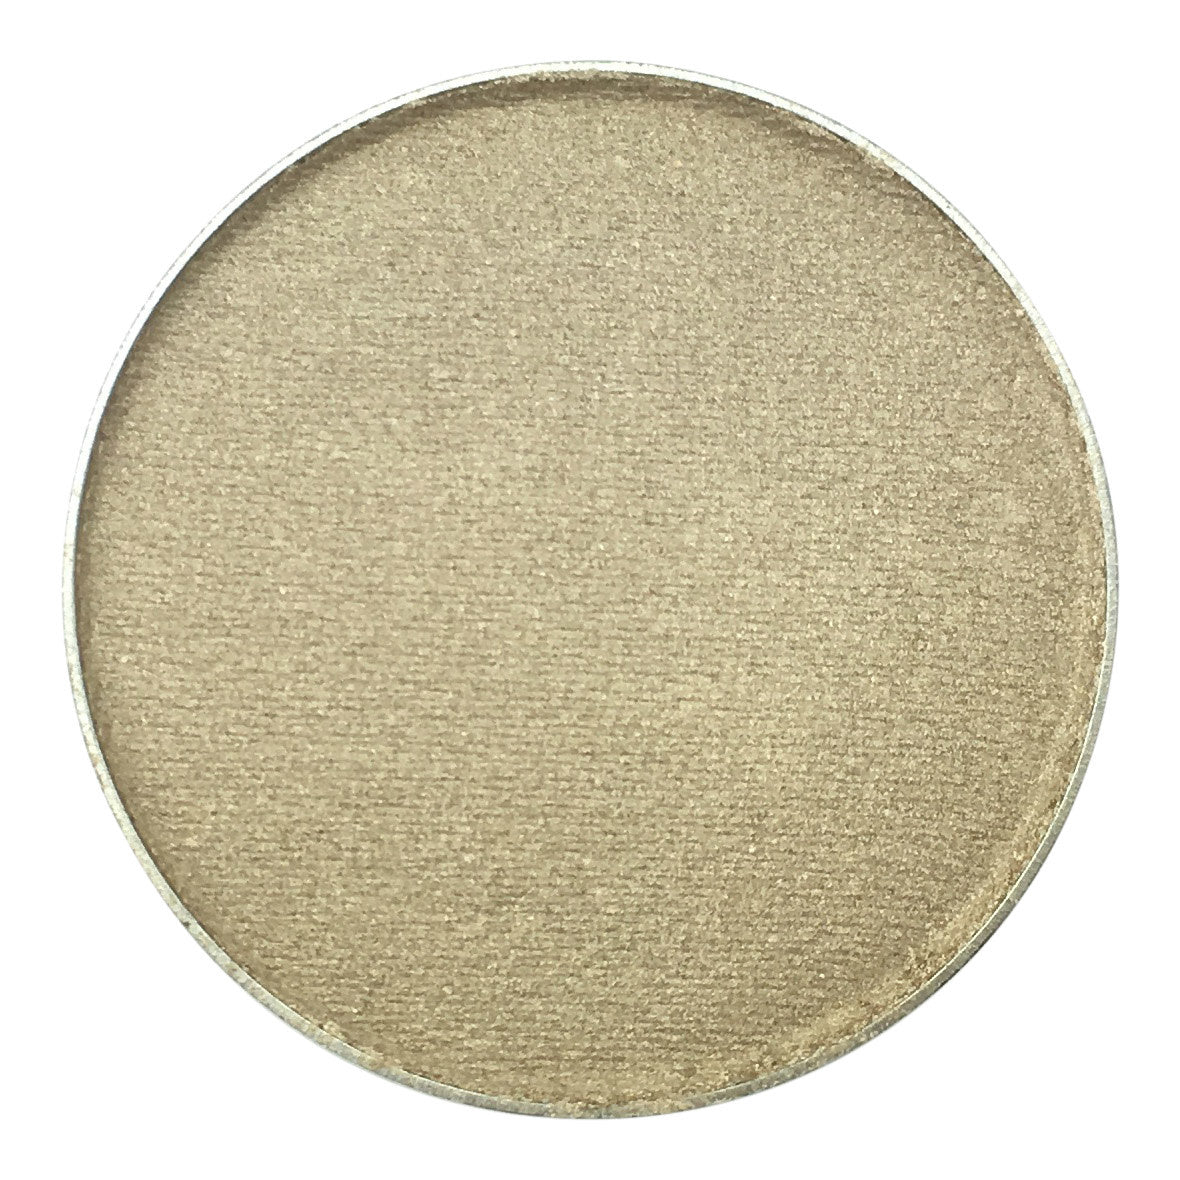 Pure Anada - Compact Pressed Eyeshadow Mirage